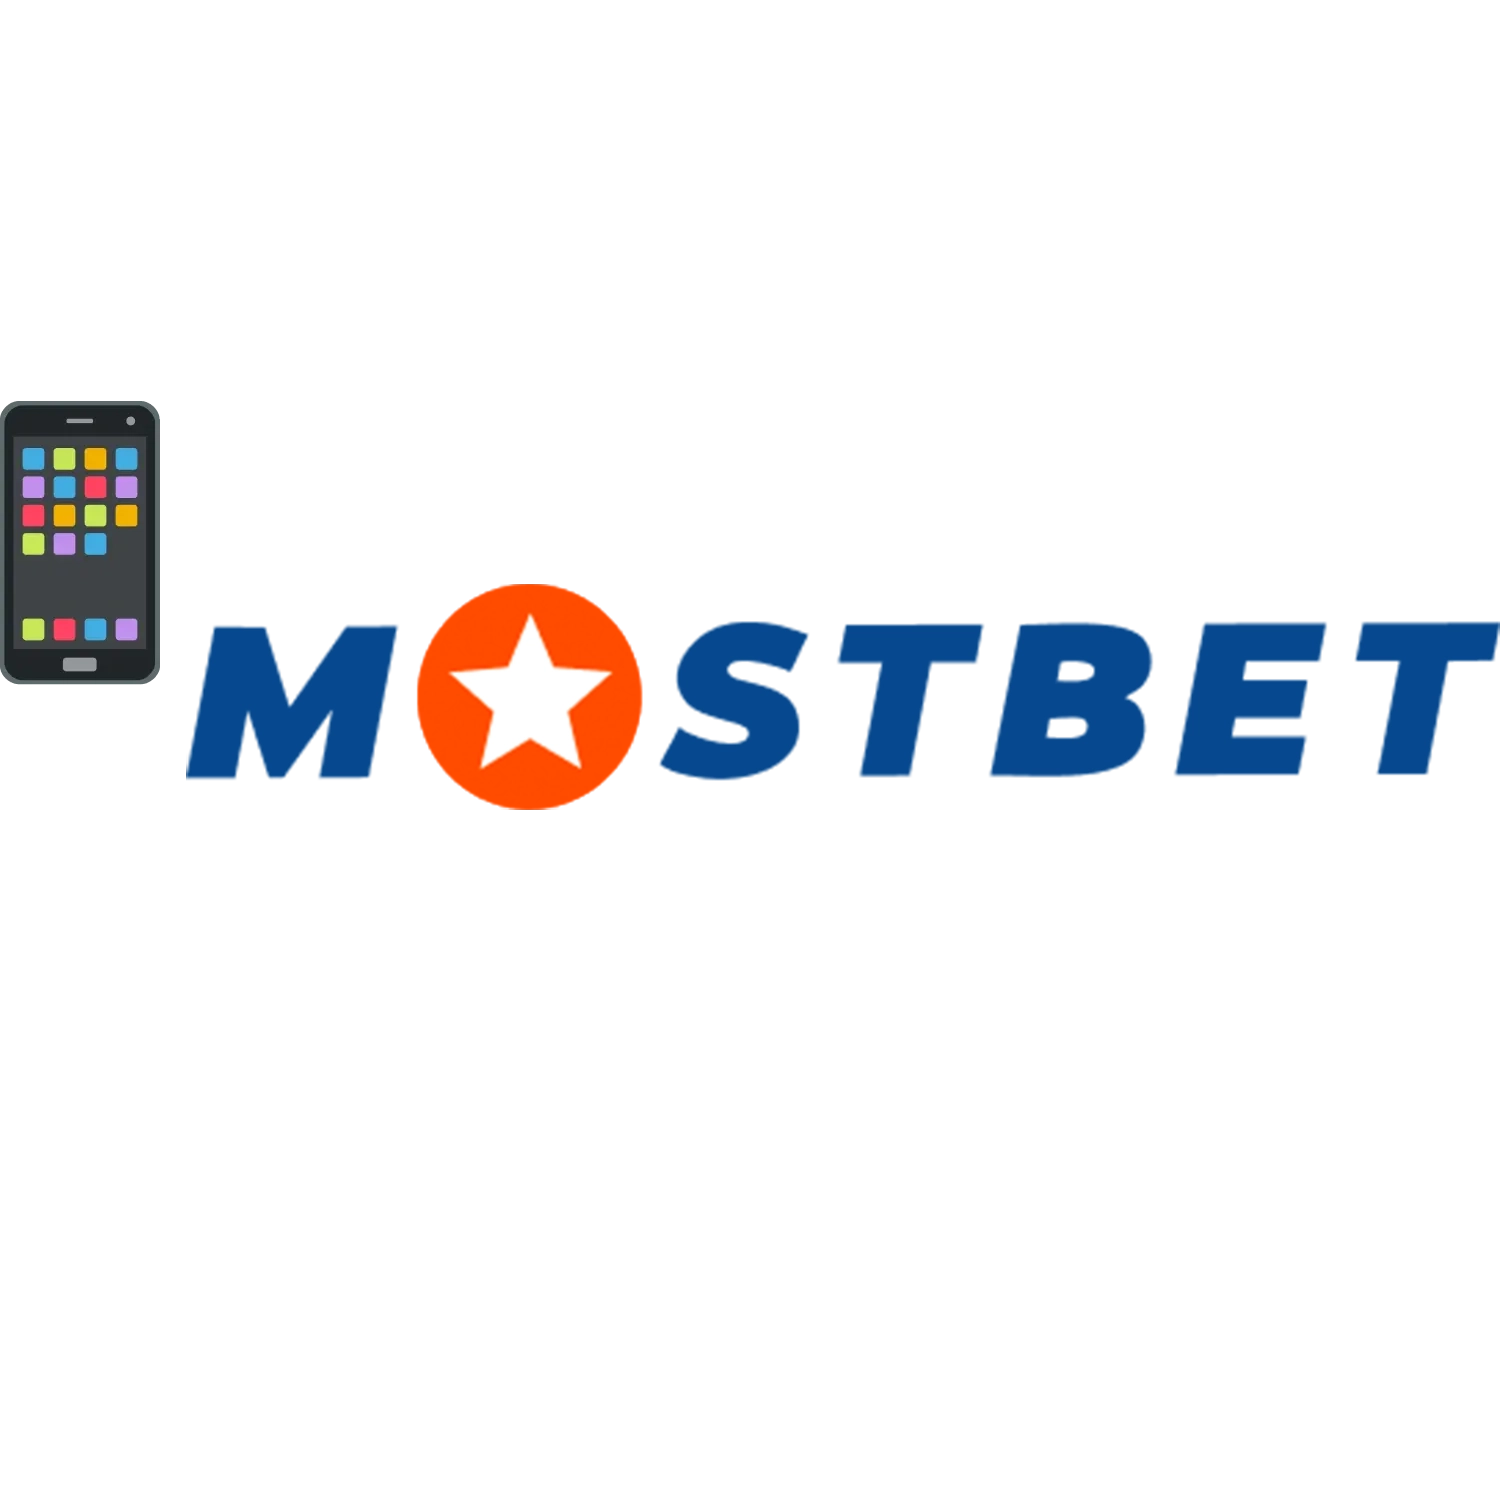 The Mostbet app is renowned for its simplicity and elegance.